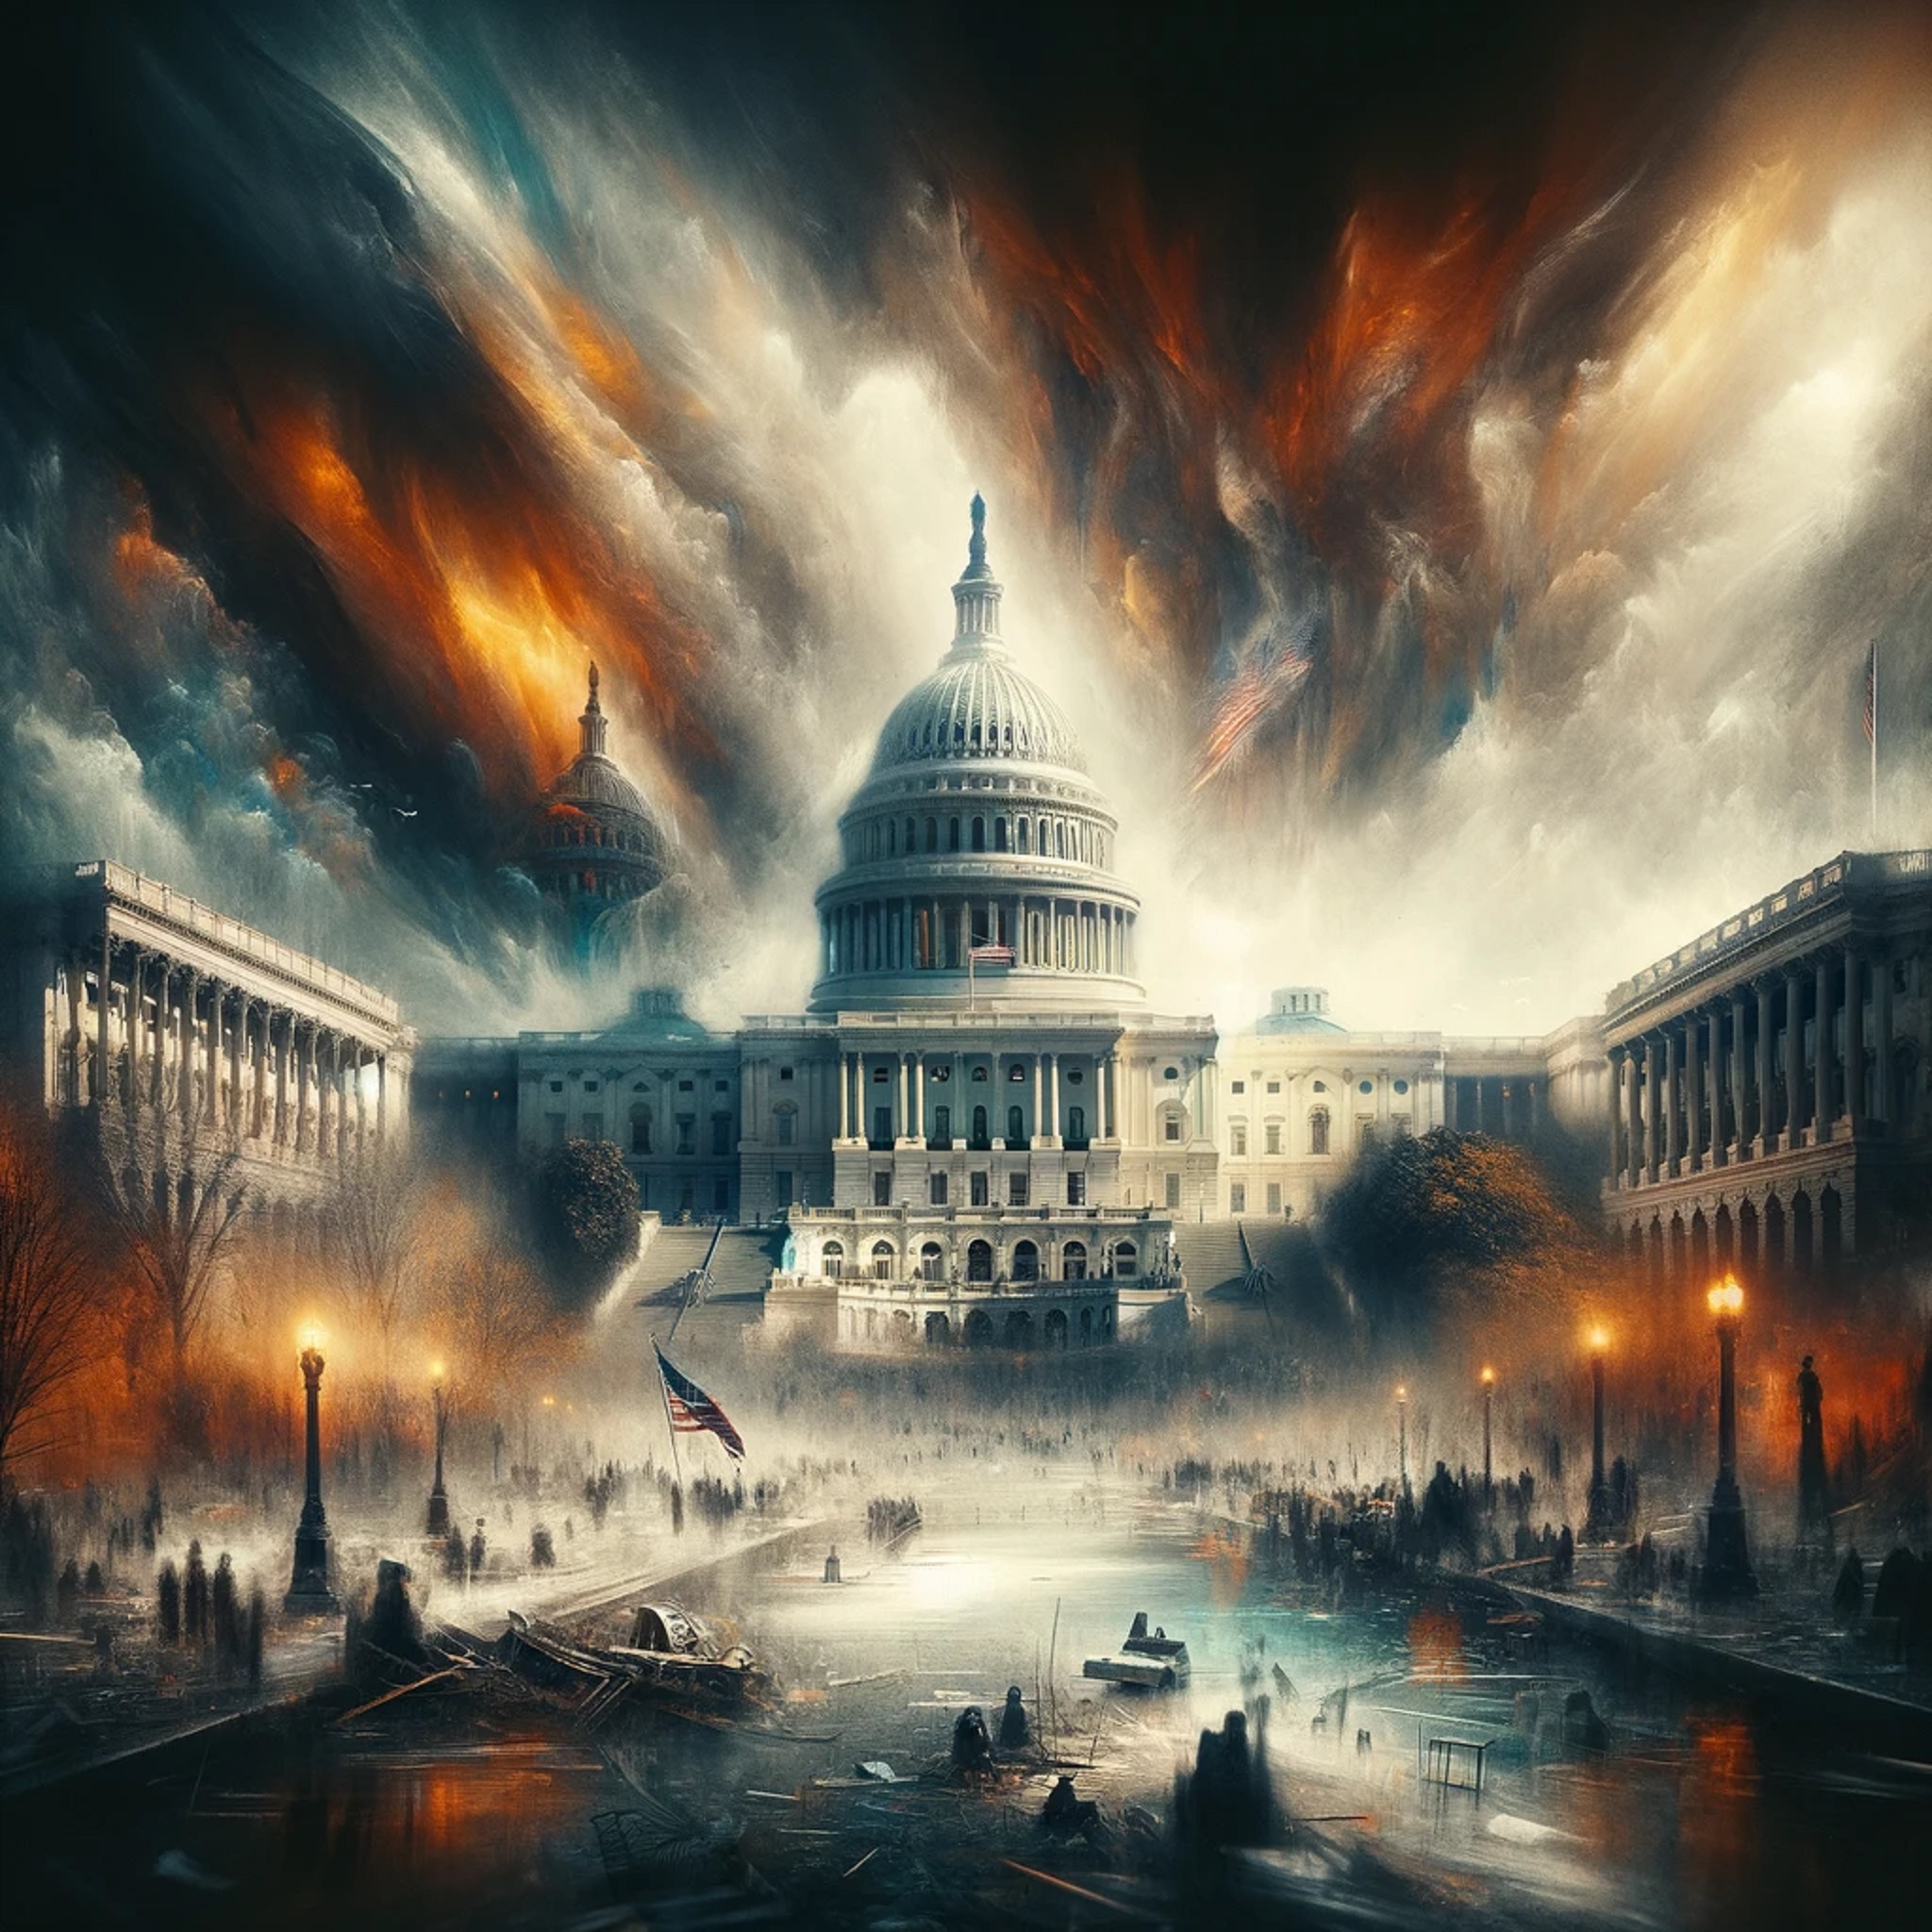 Insurrection at the Capitol: A Dark Day in American History